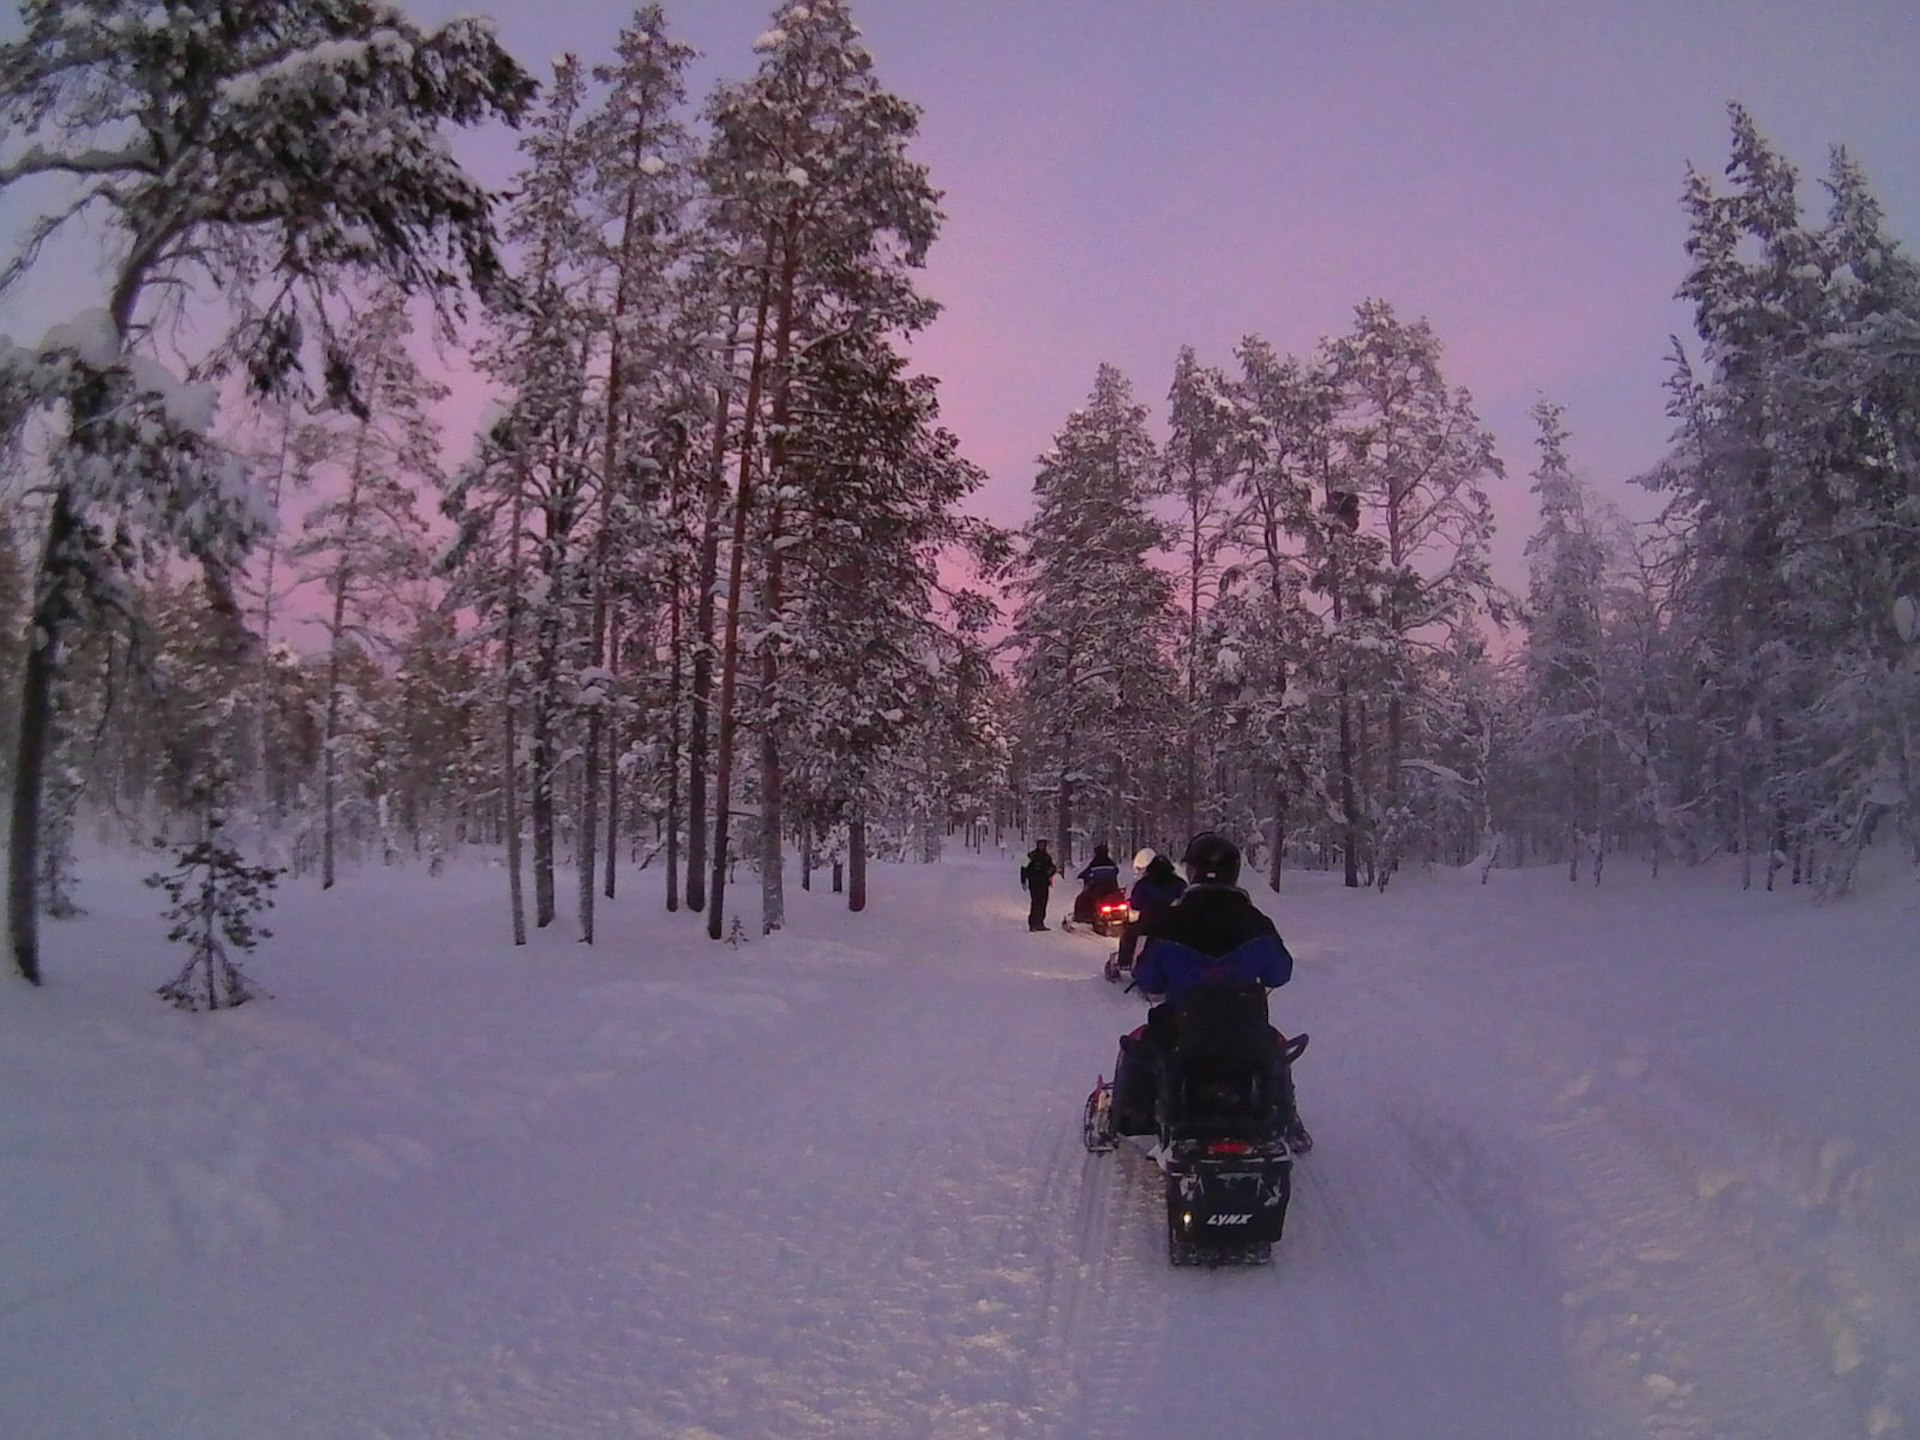 Several snowmobilers lined up one behind the other between the trees in a forest trail under a pink sky.